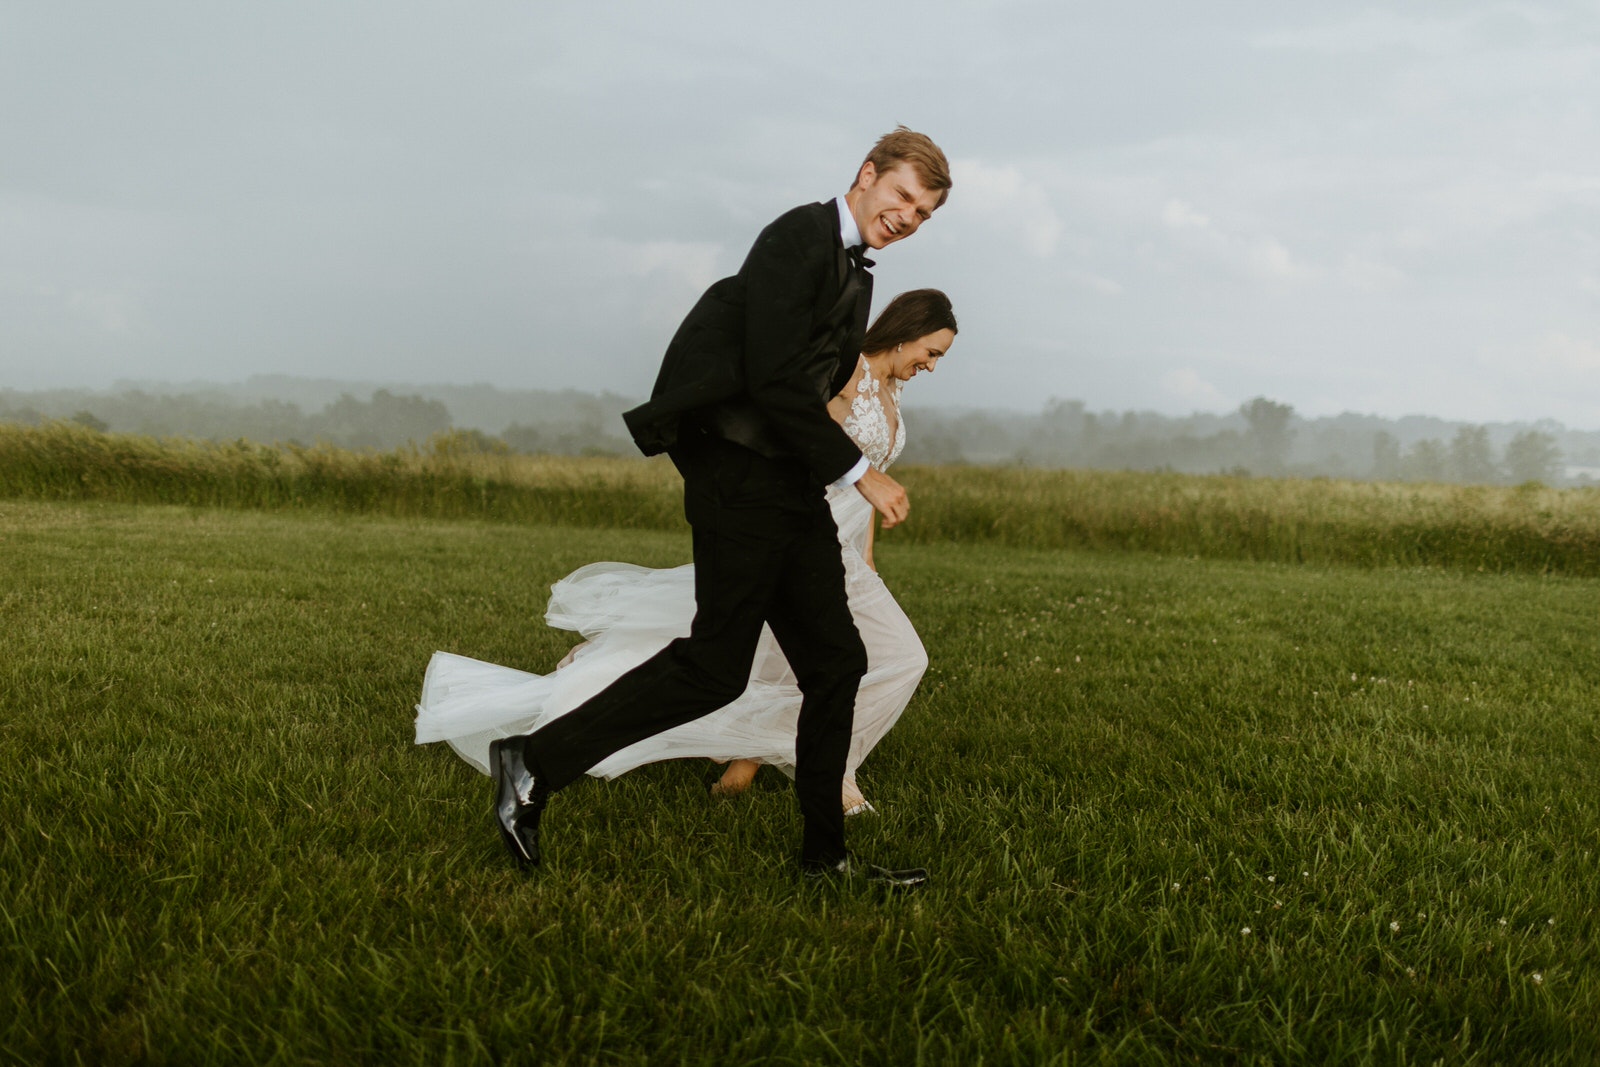 A bride and groom captured running across a field, using the camera’s burst shooting mode.